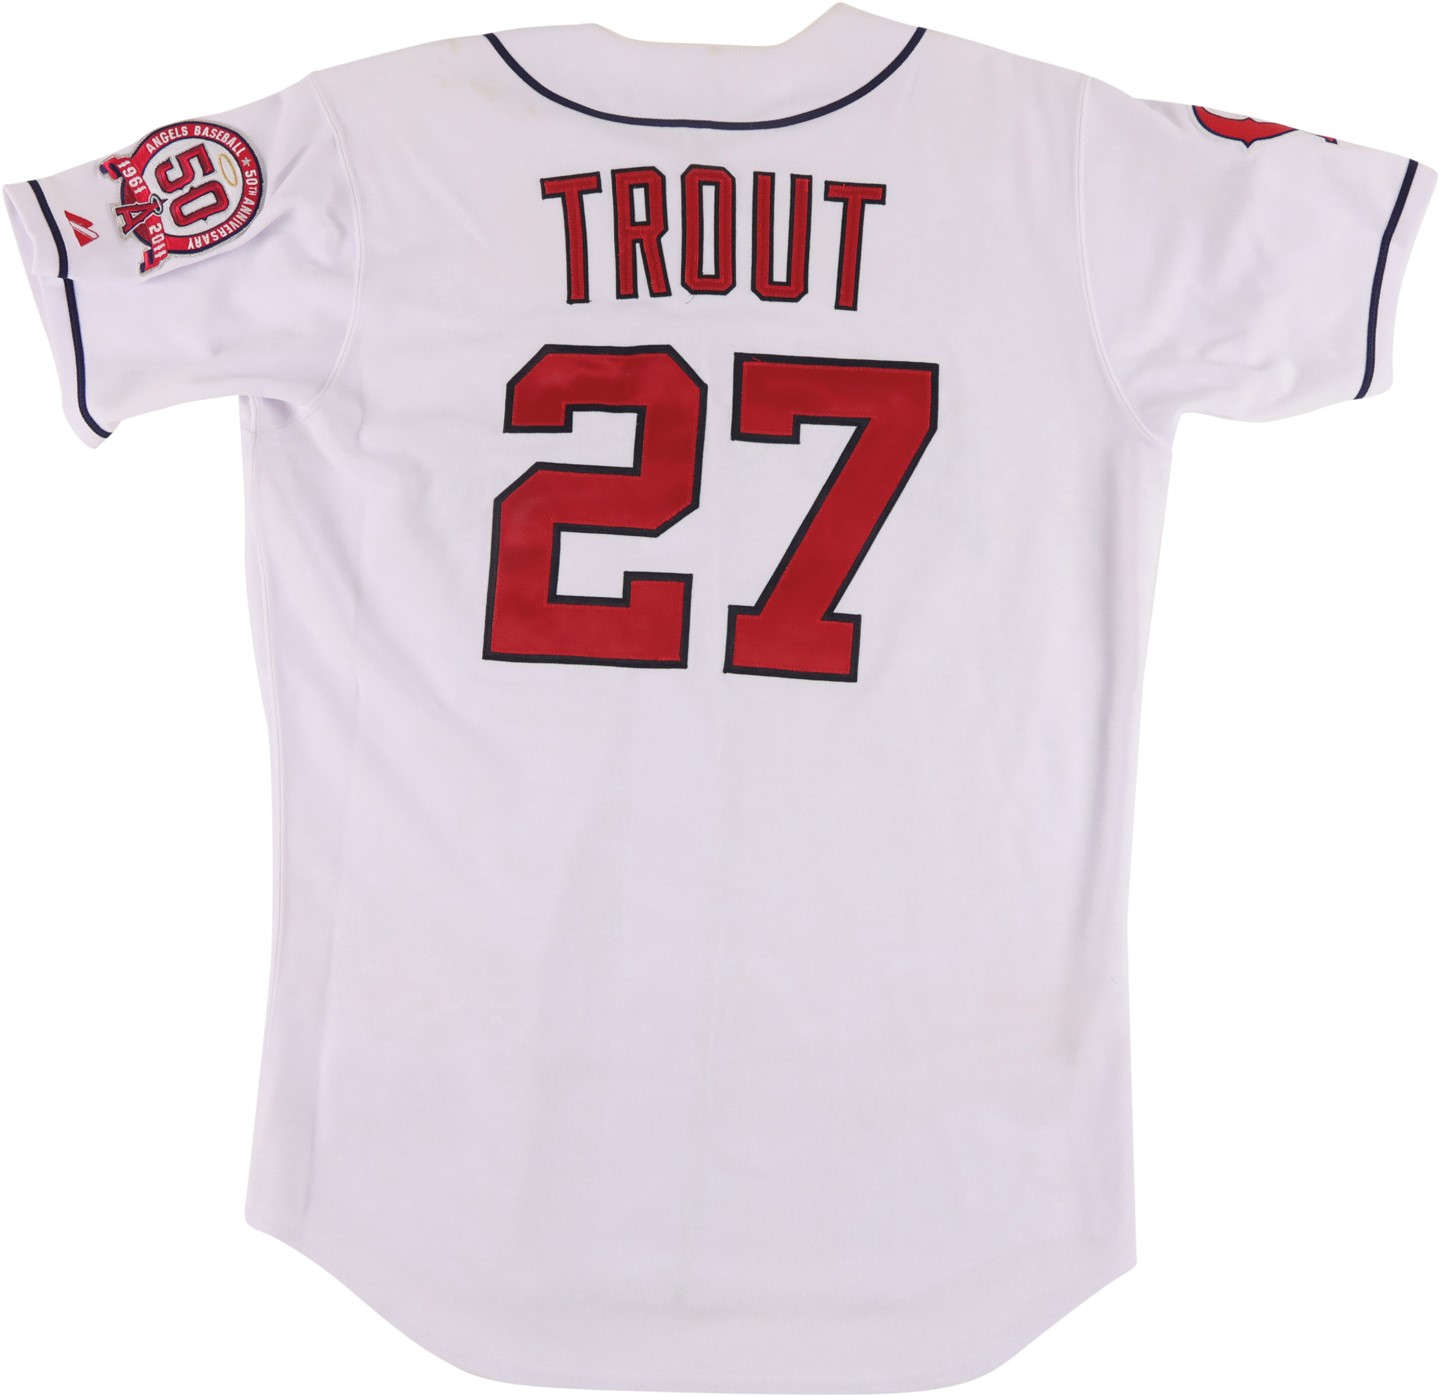 MIKE TROUT SIGNED 2012 ALL STAR JERSEY AUTHENTIC MAJESTIC-L.A. ANGELS OF  ANAHEIM